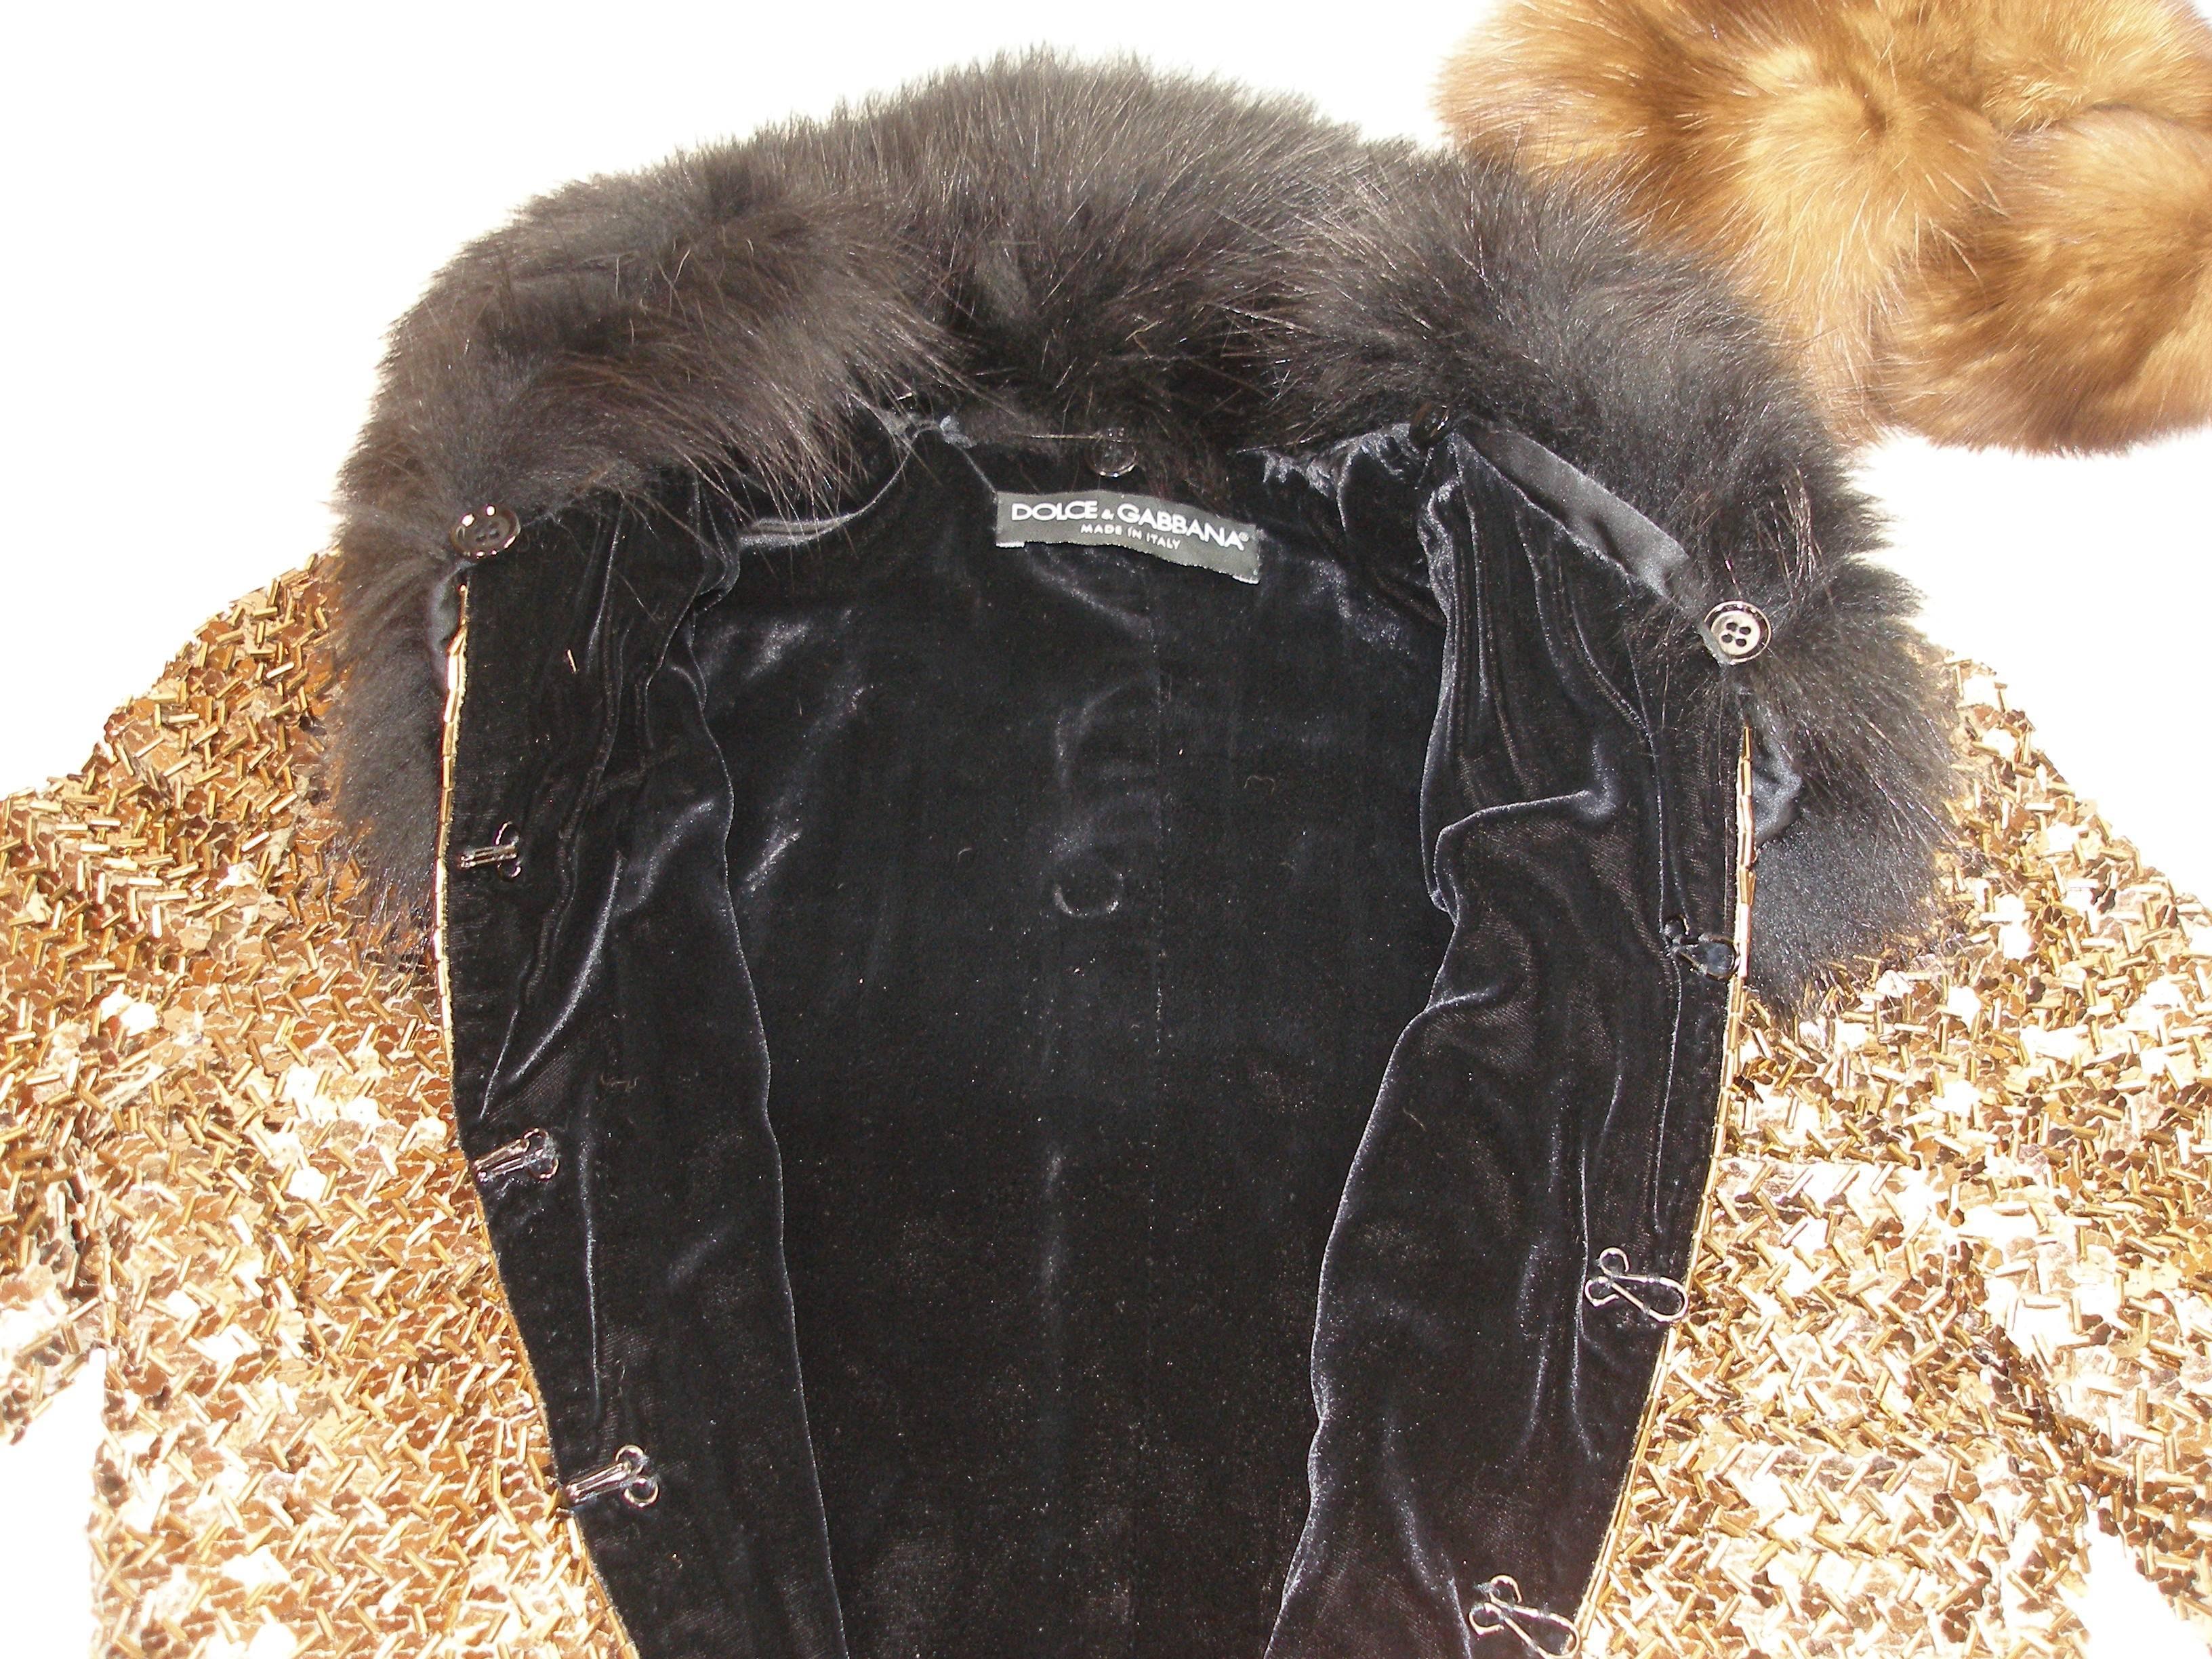 Limited Edition Spécial Piéce Fur and Sequined Dolce & Gabbana Coat Size 38 IT  For Sale 1